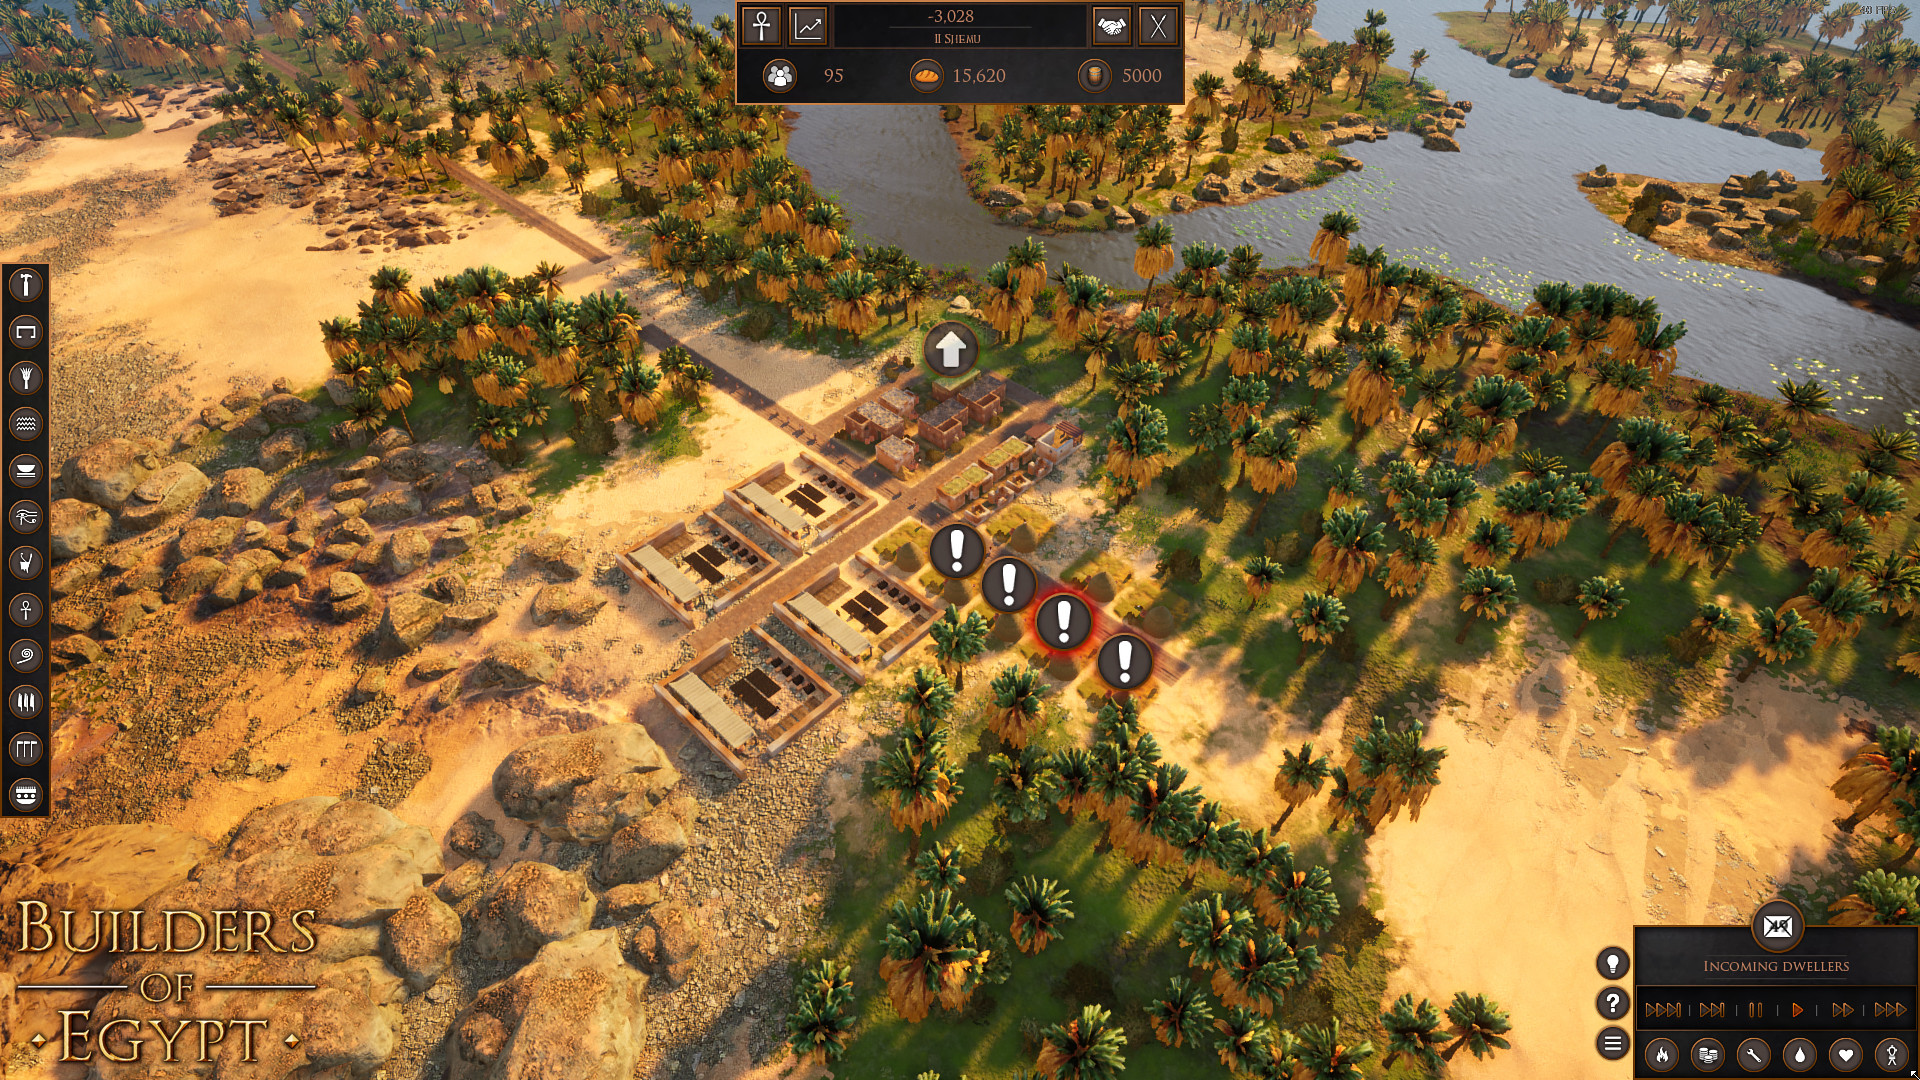 Builders of Egypt on Steam